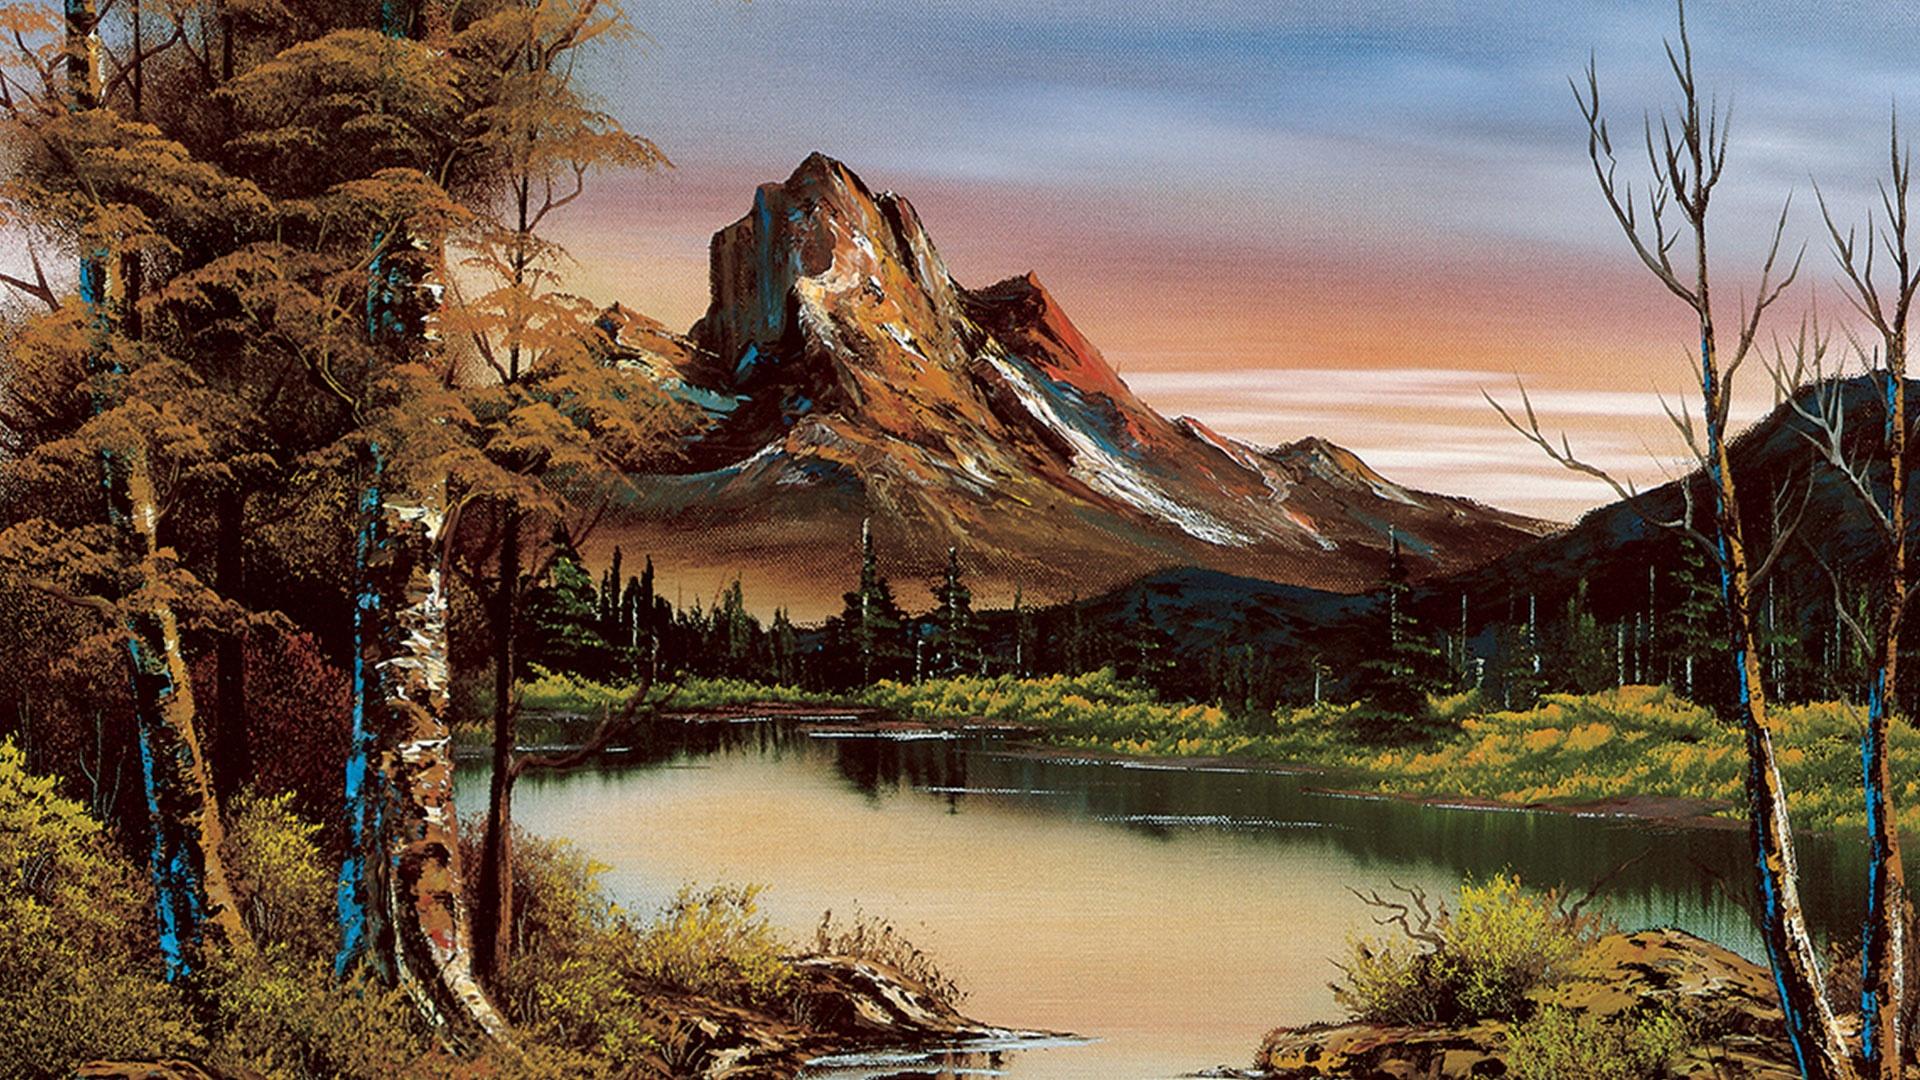 The Best of the Joy of Painting with Bob Ross, Quiet Woods, Season 37, Episode 3748